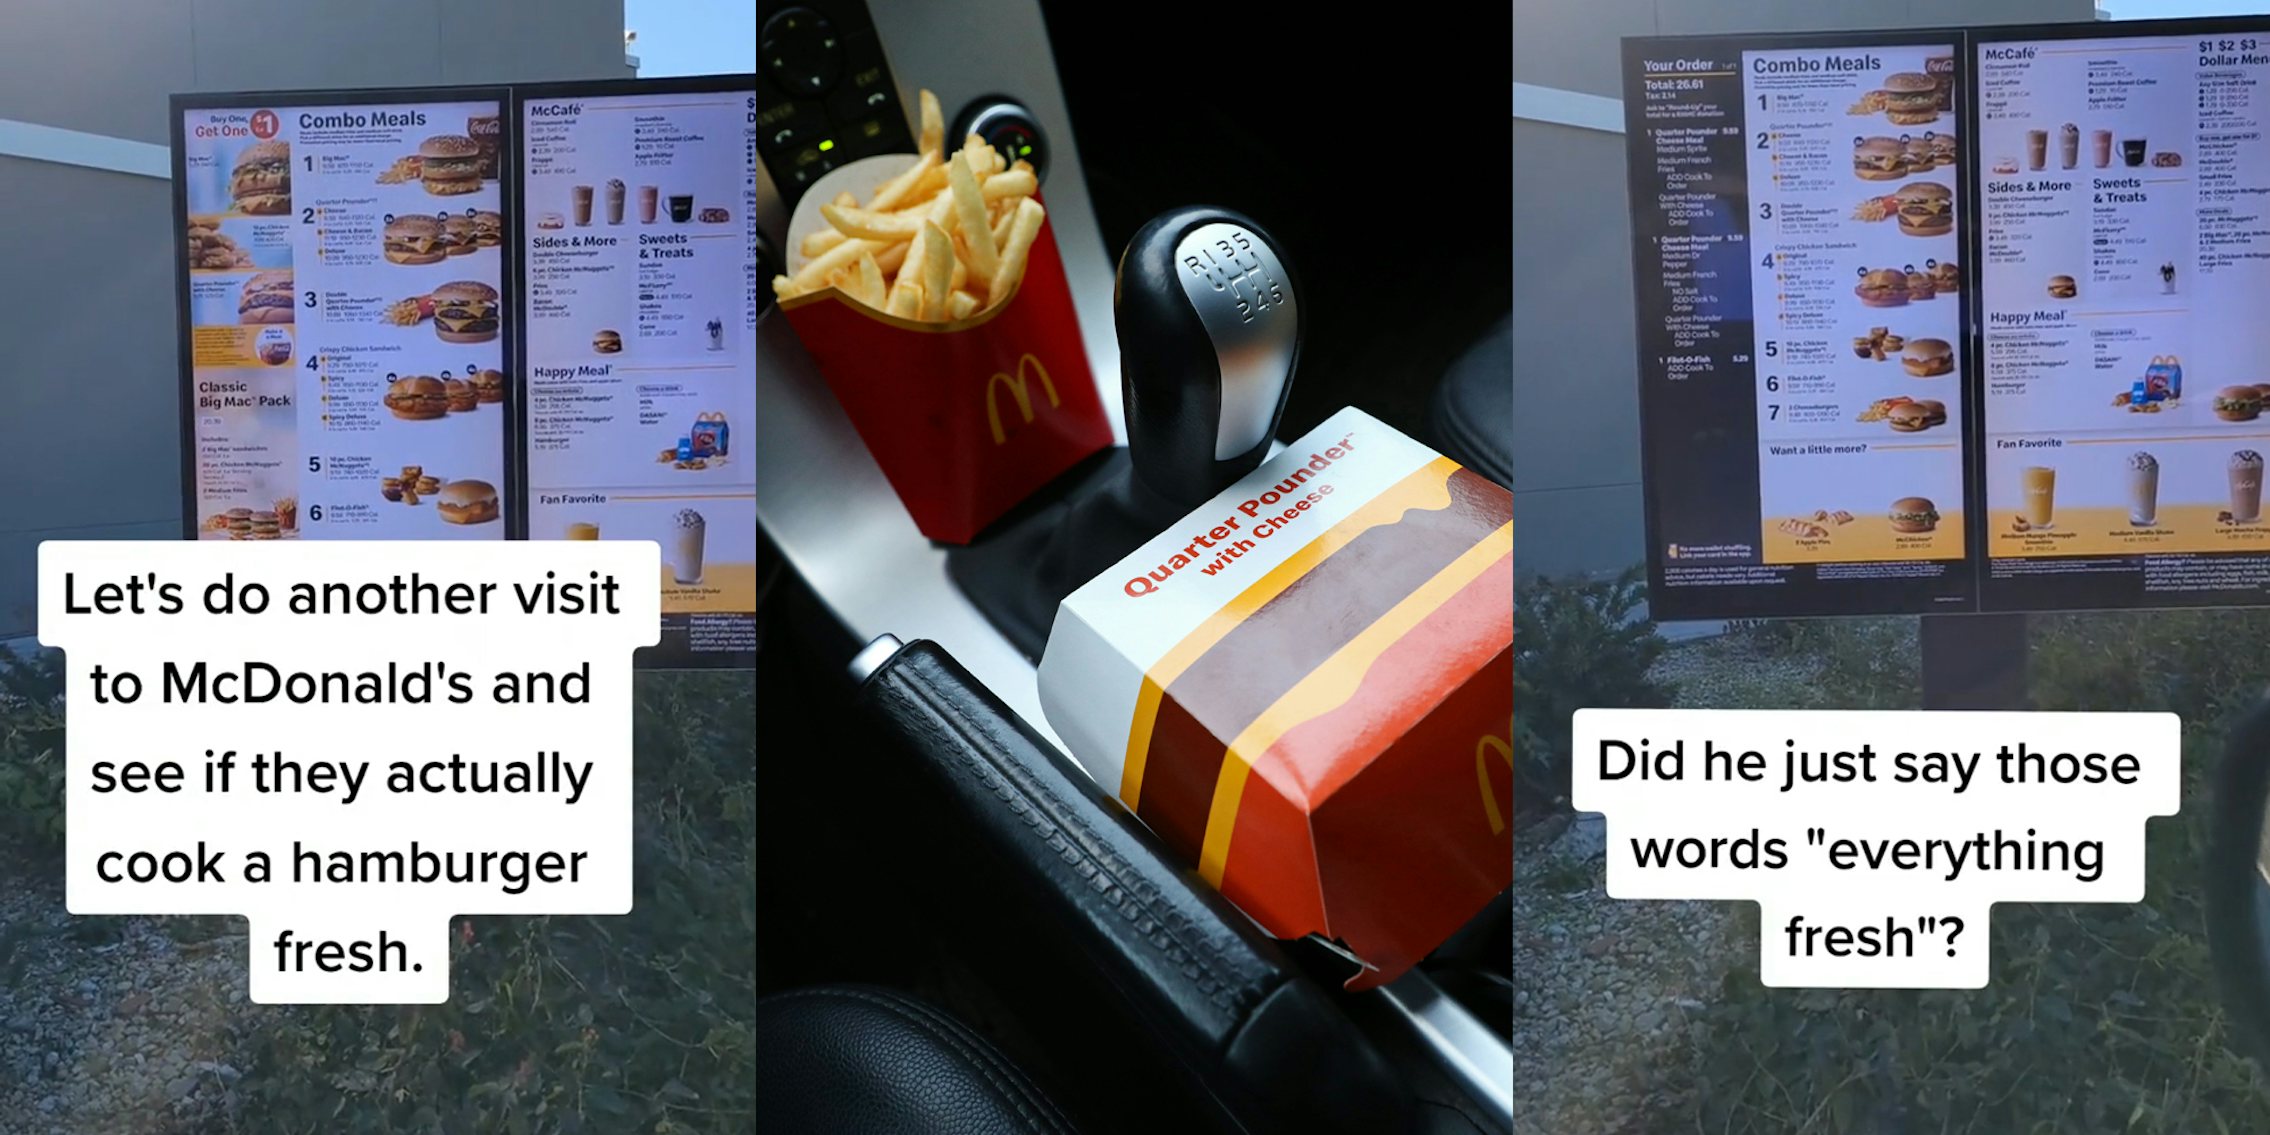 McDonald's drive thru menu with caption 'Let's do another visit to McDonald's and see if they actually cook a hamburger fresh.' (l) McDonald's quarter pounder and fries in car (c) McDonald's drive thru menu with caption 'Did he just say those words 'everything fresh'?' (r)